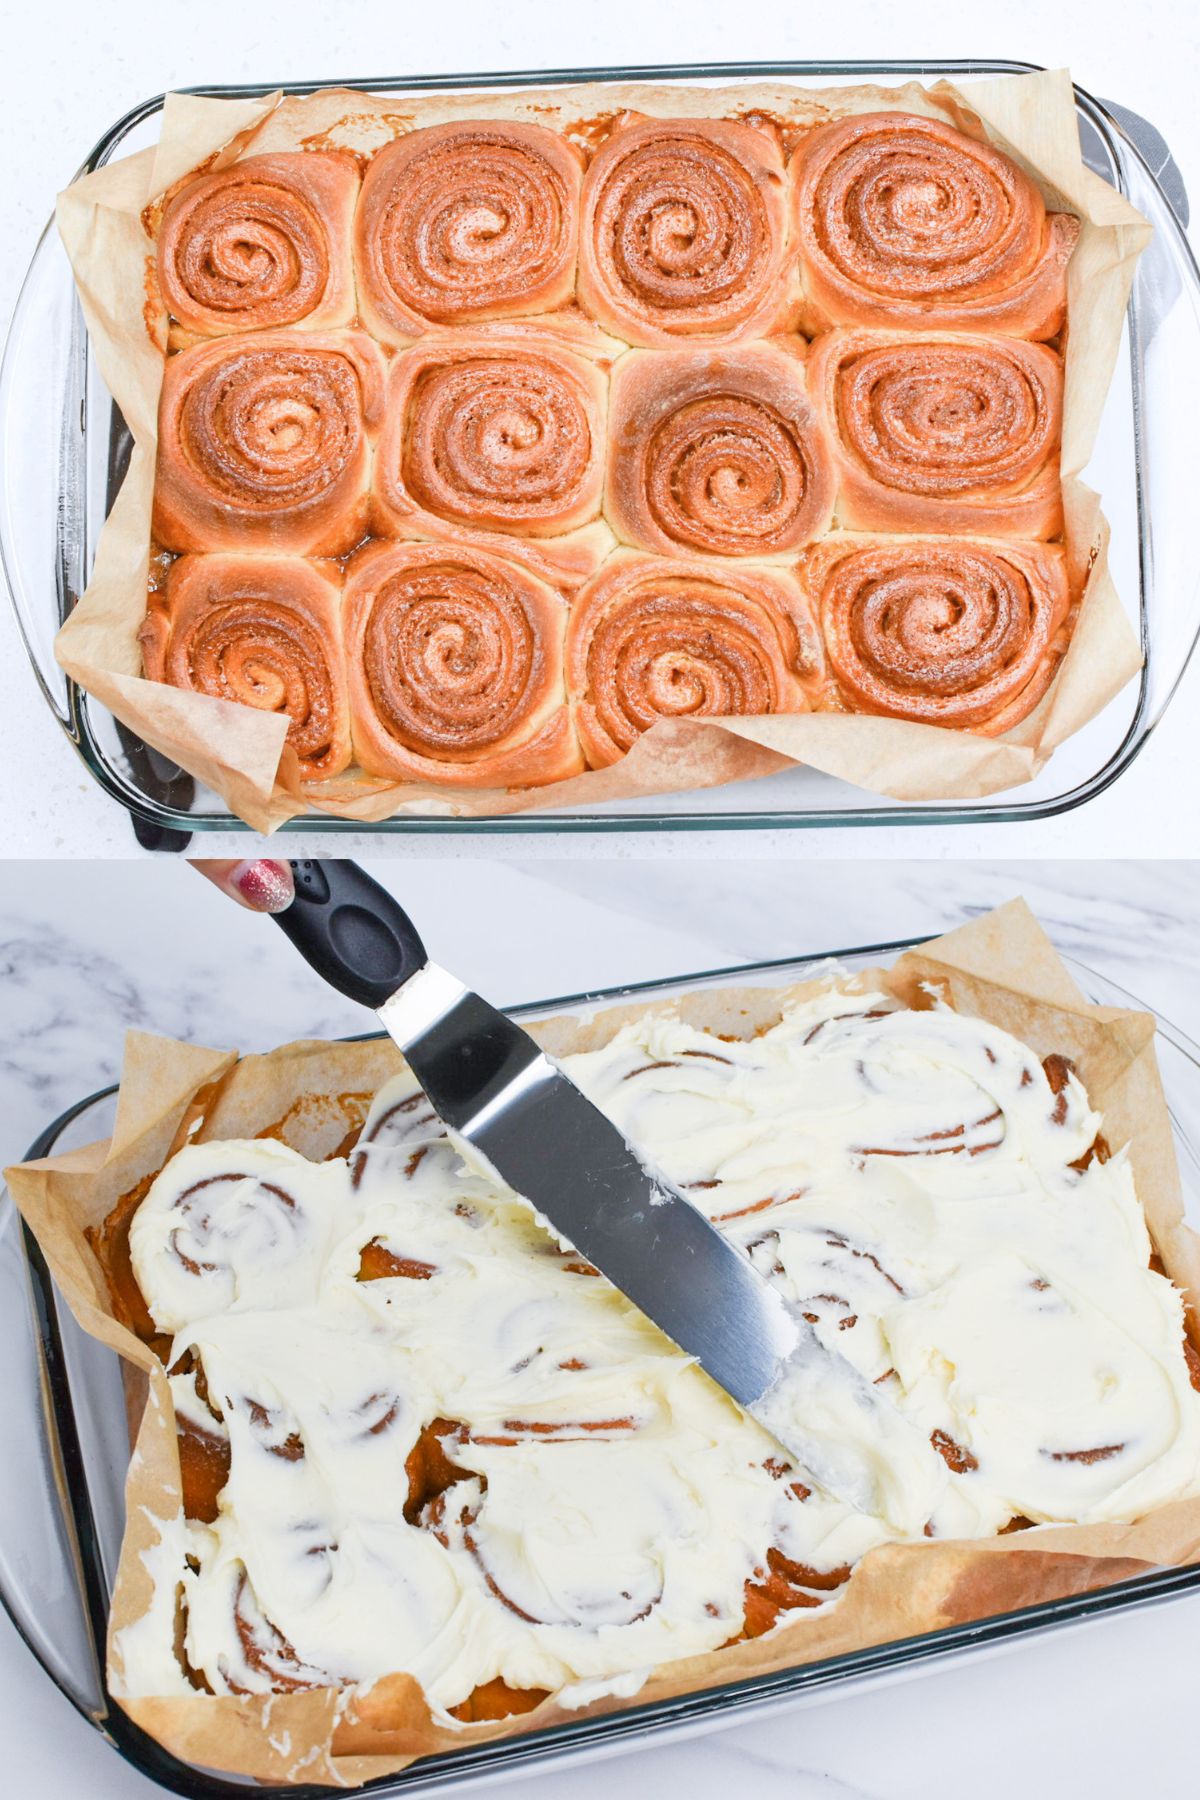 Baked cinnamon rolls in a casserole dish and spreading the frosting on the cinnamon rolls.